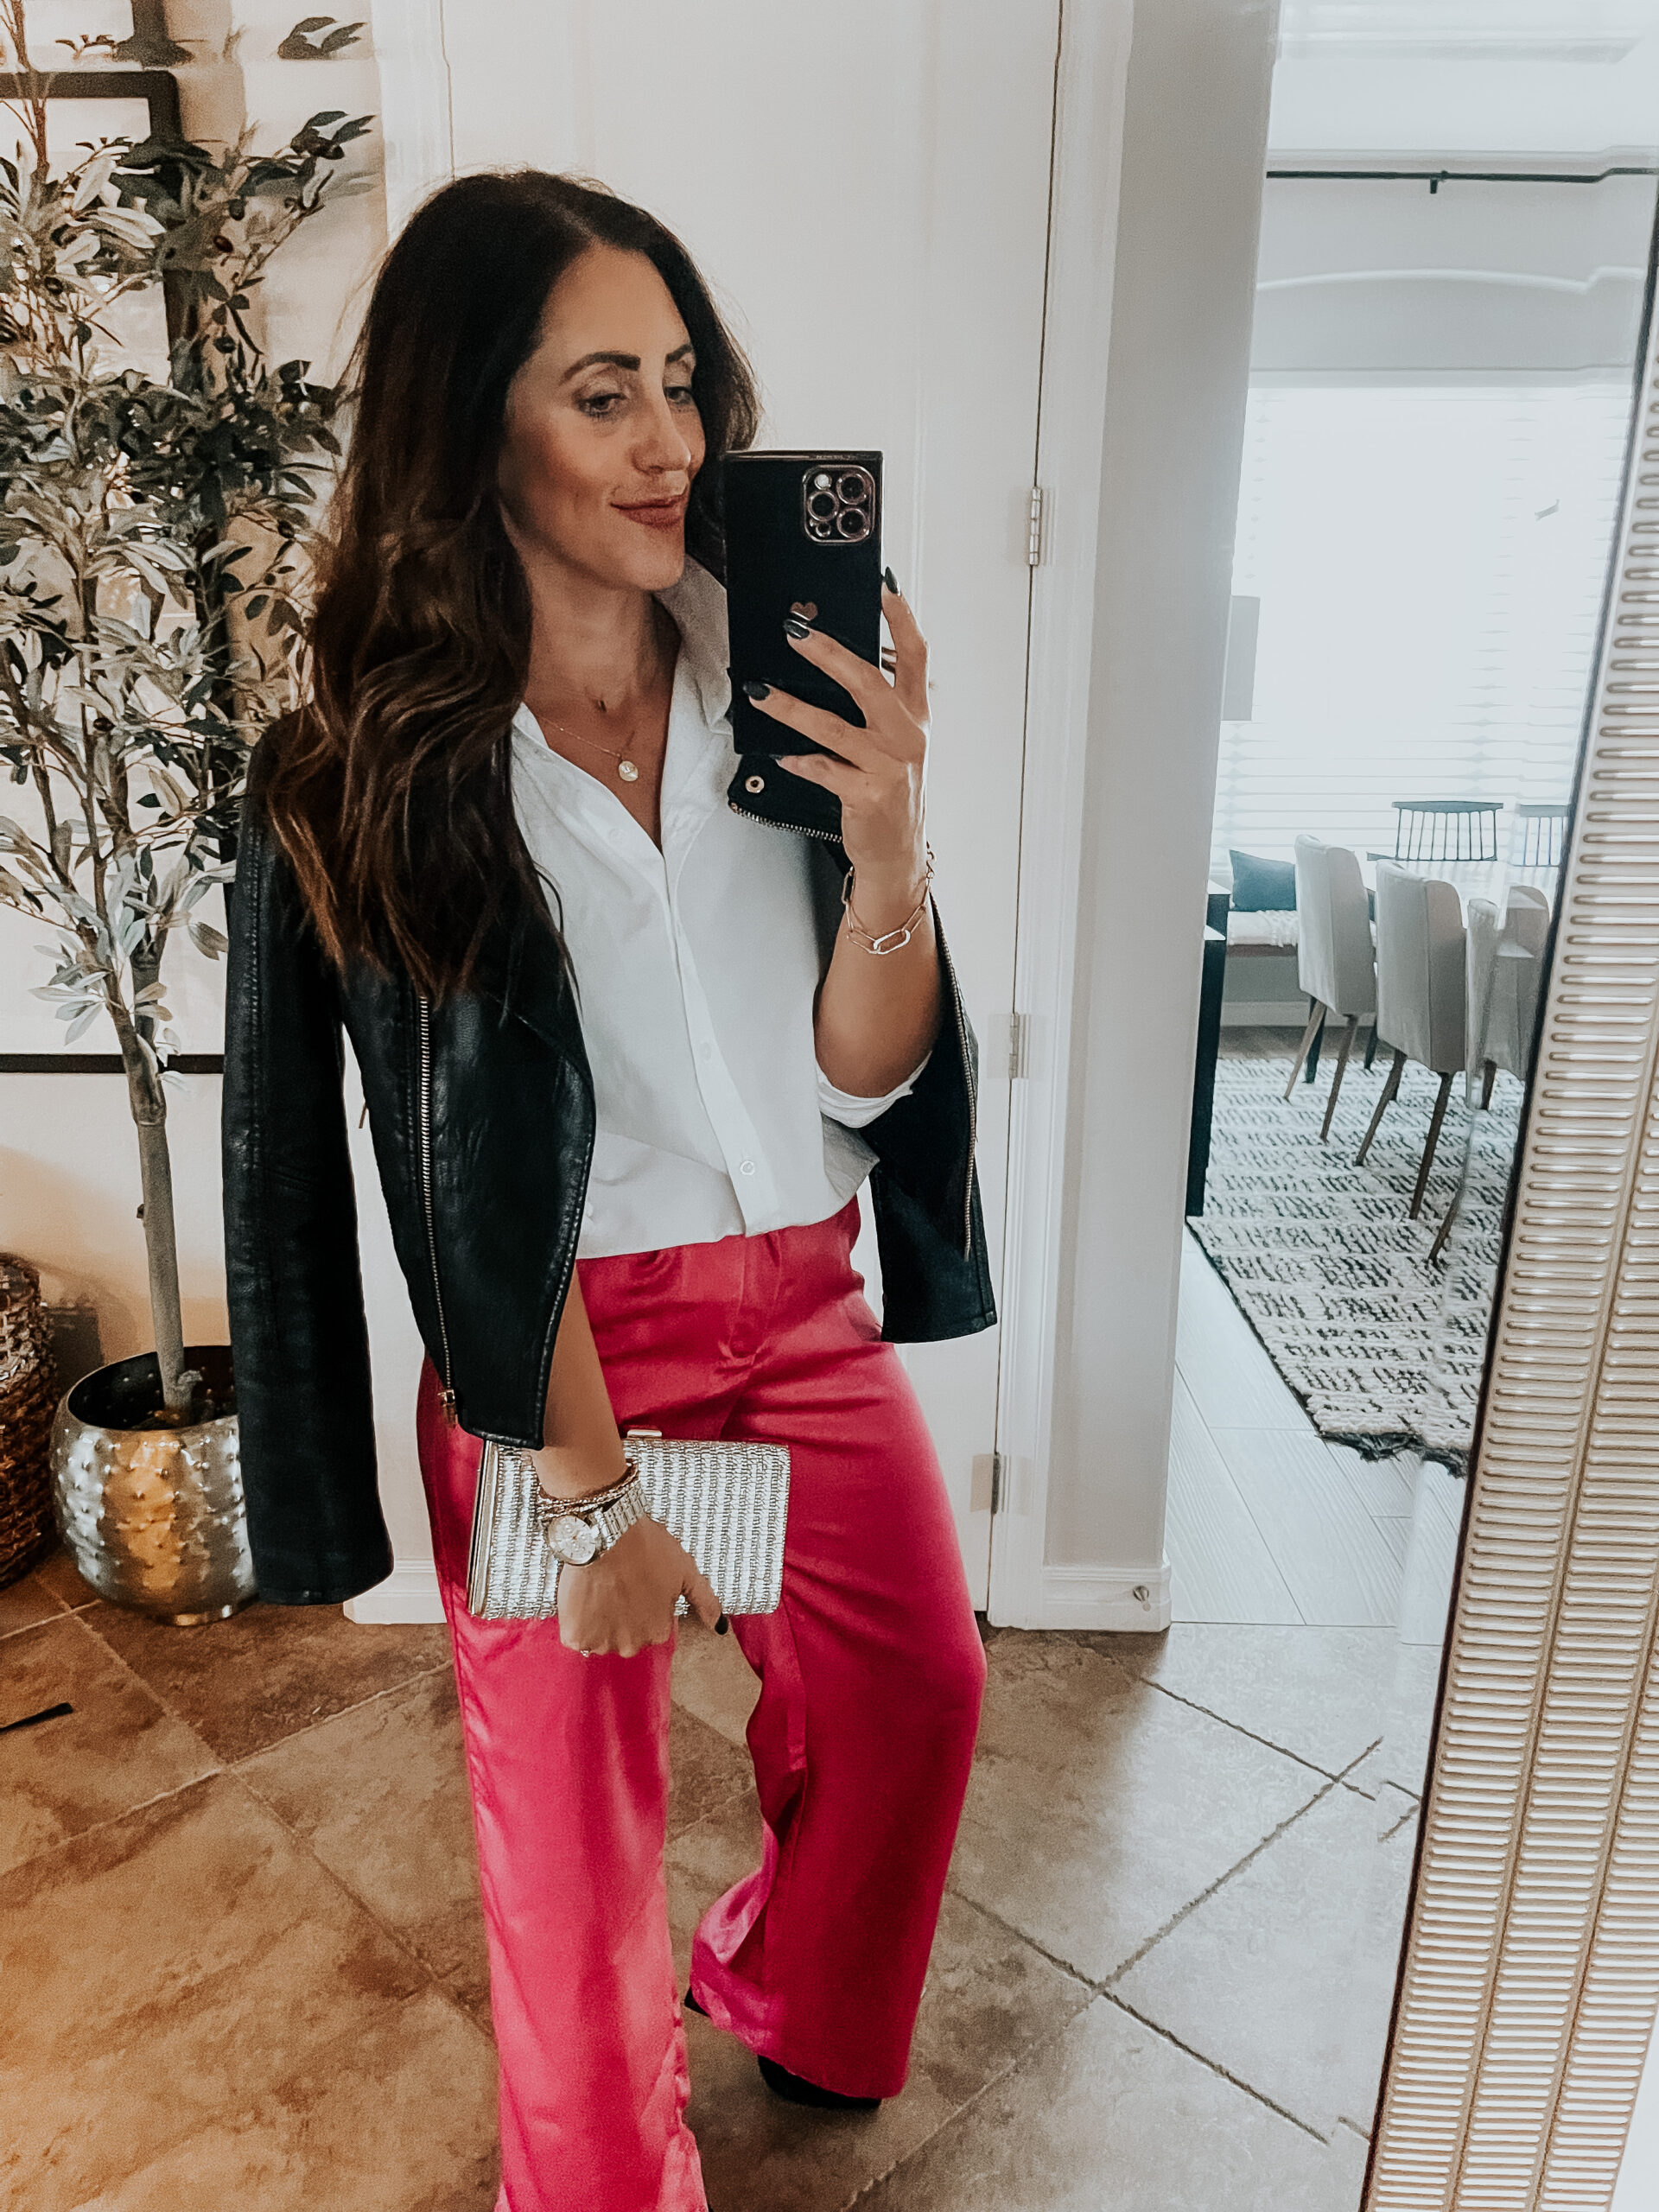 satin pants with white blouse and faux leather jacket - amazon pink satin pants for valentines day